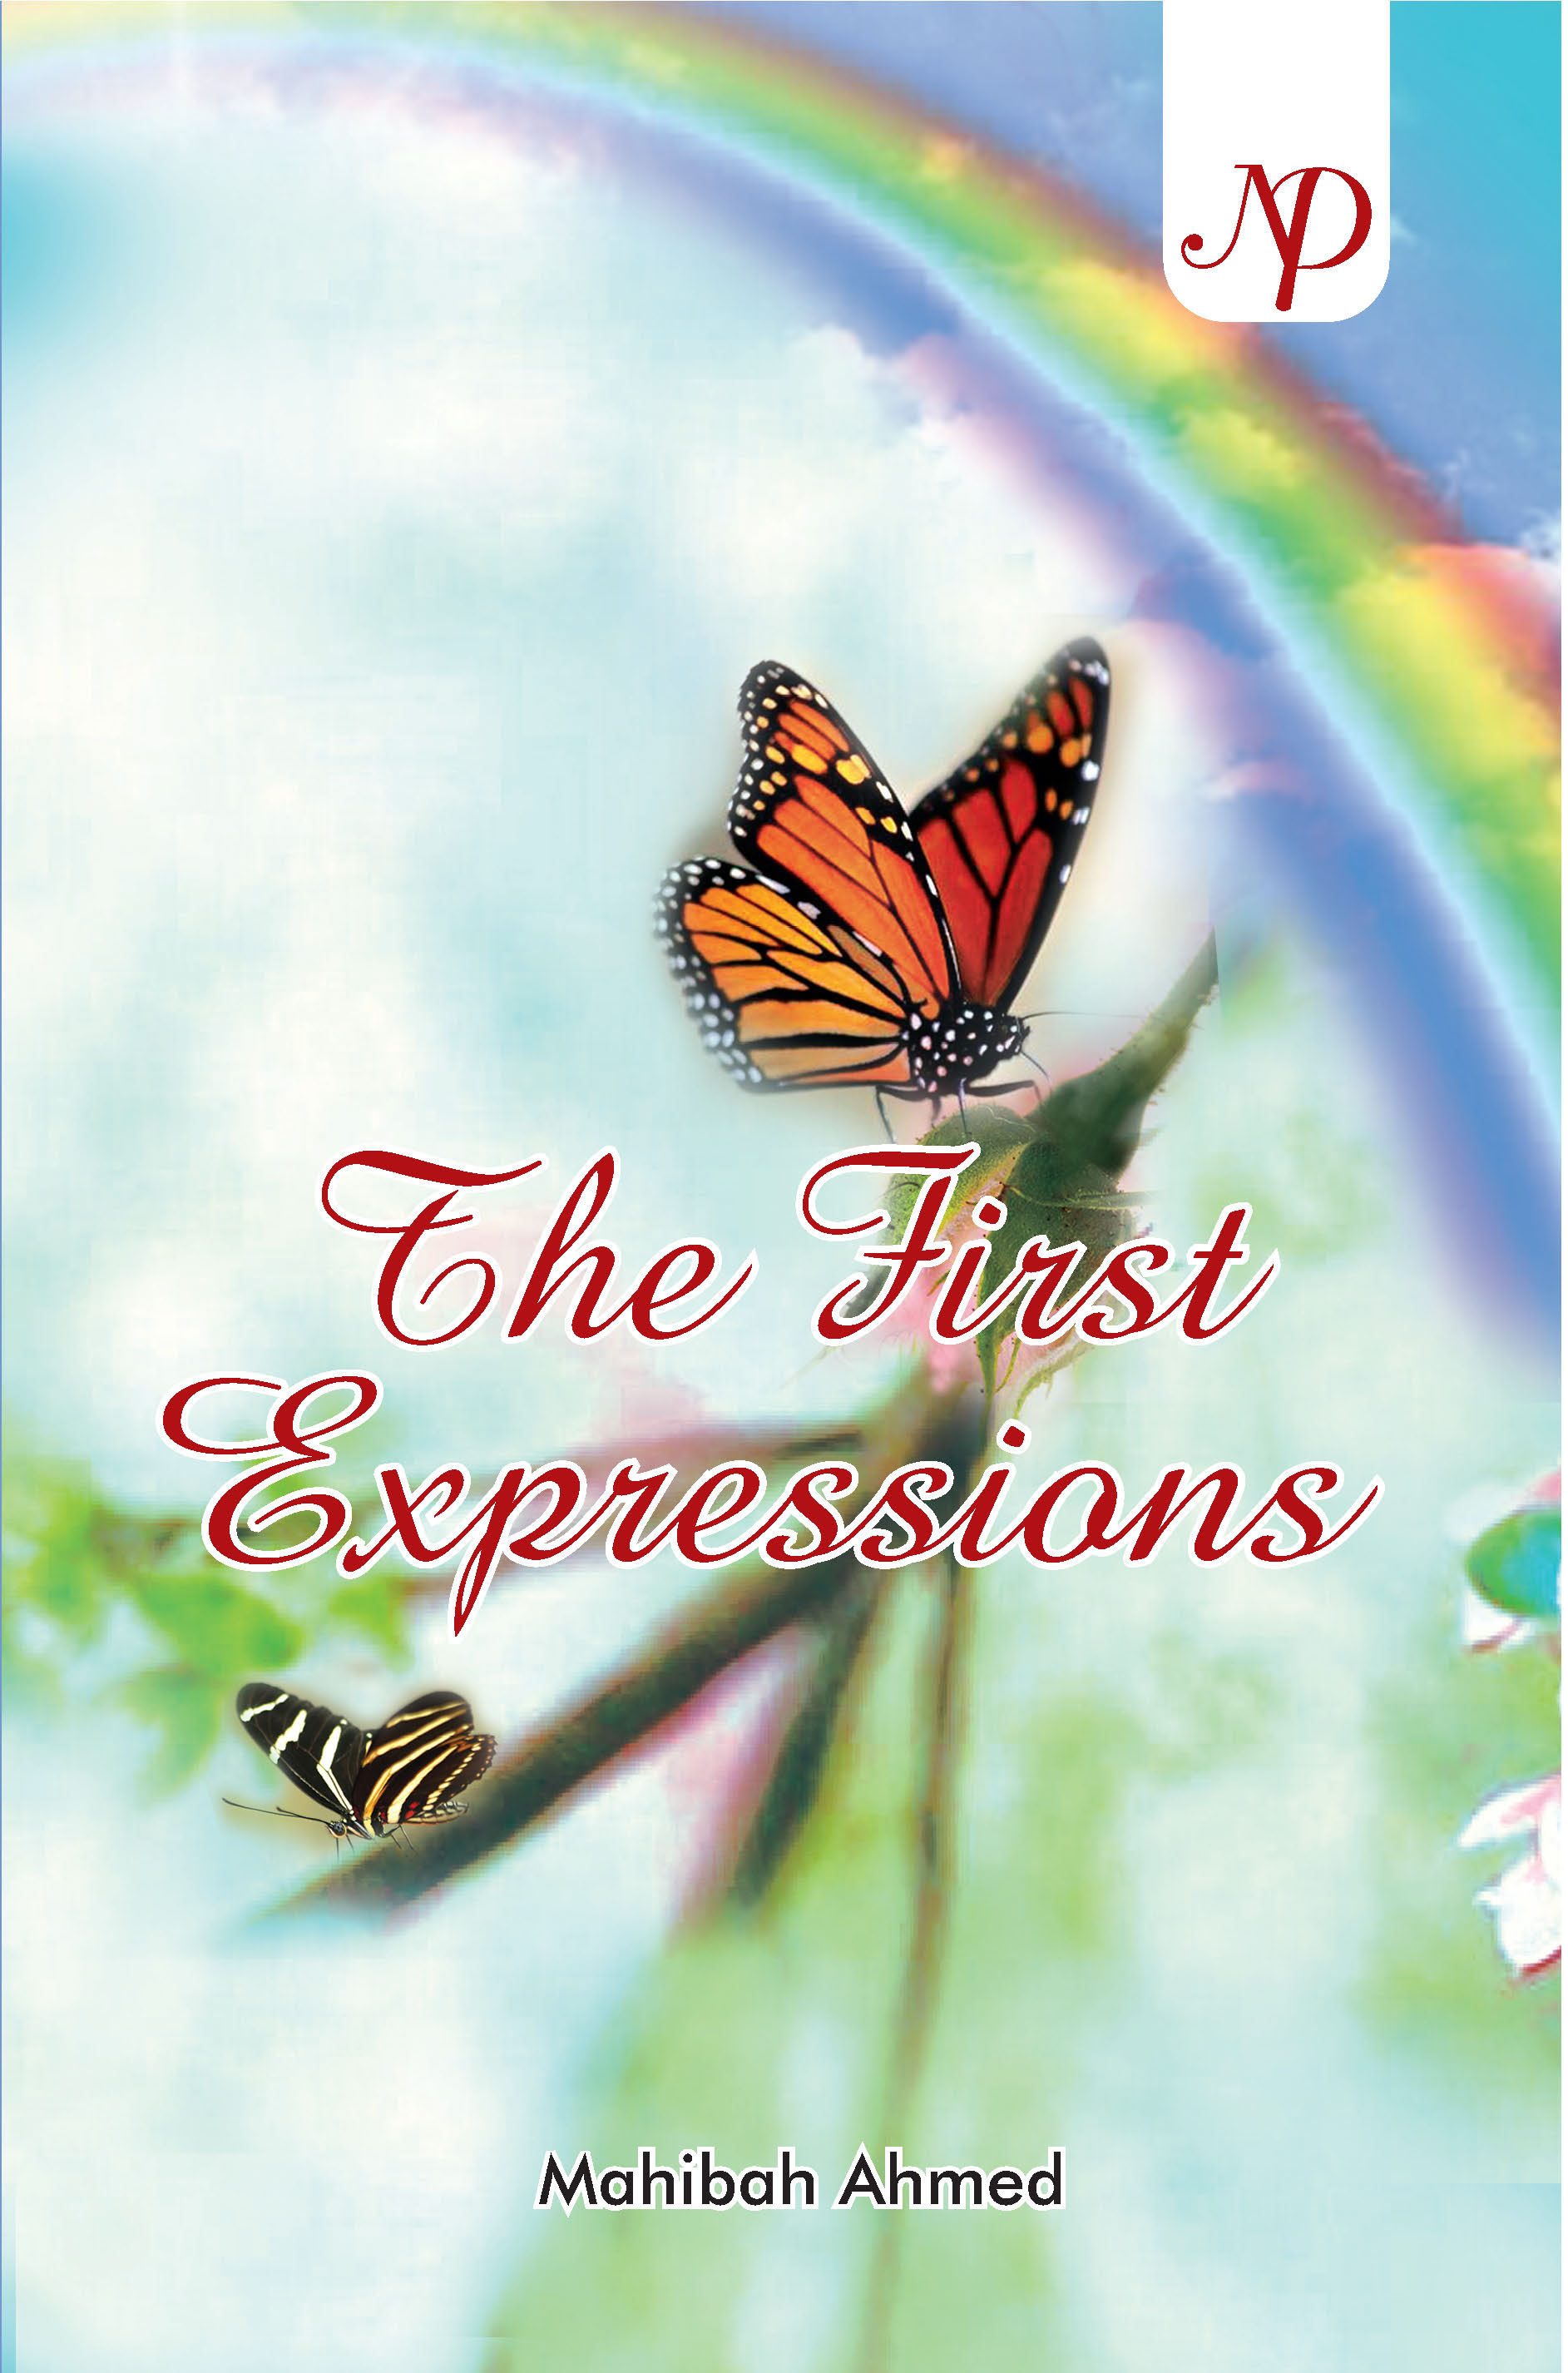 The First Expression.jpg